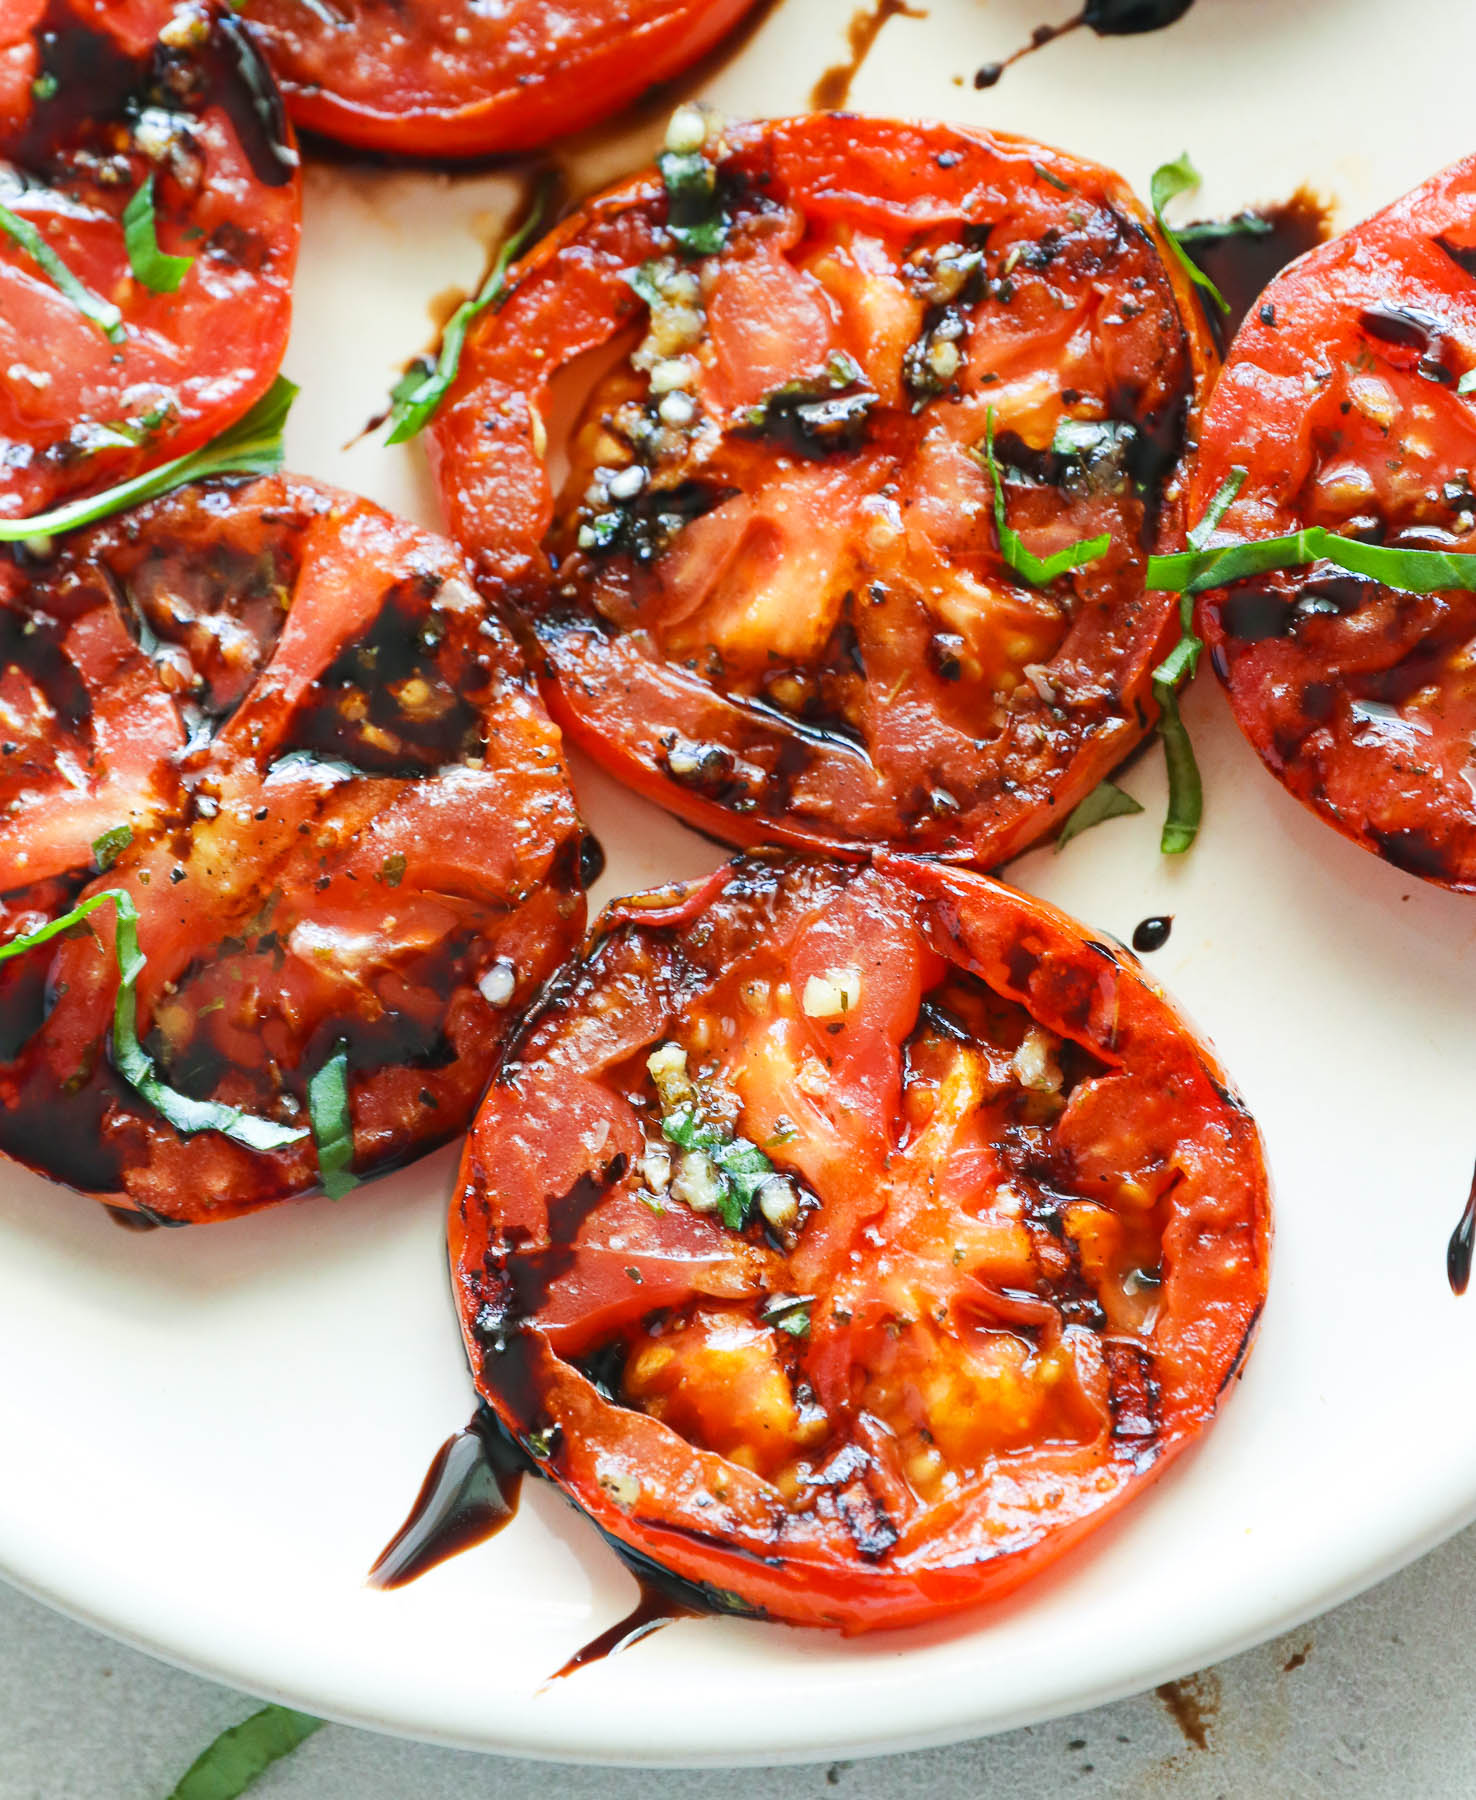 How to Make Grilled Tomatoes